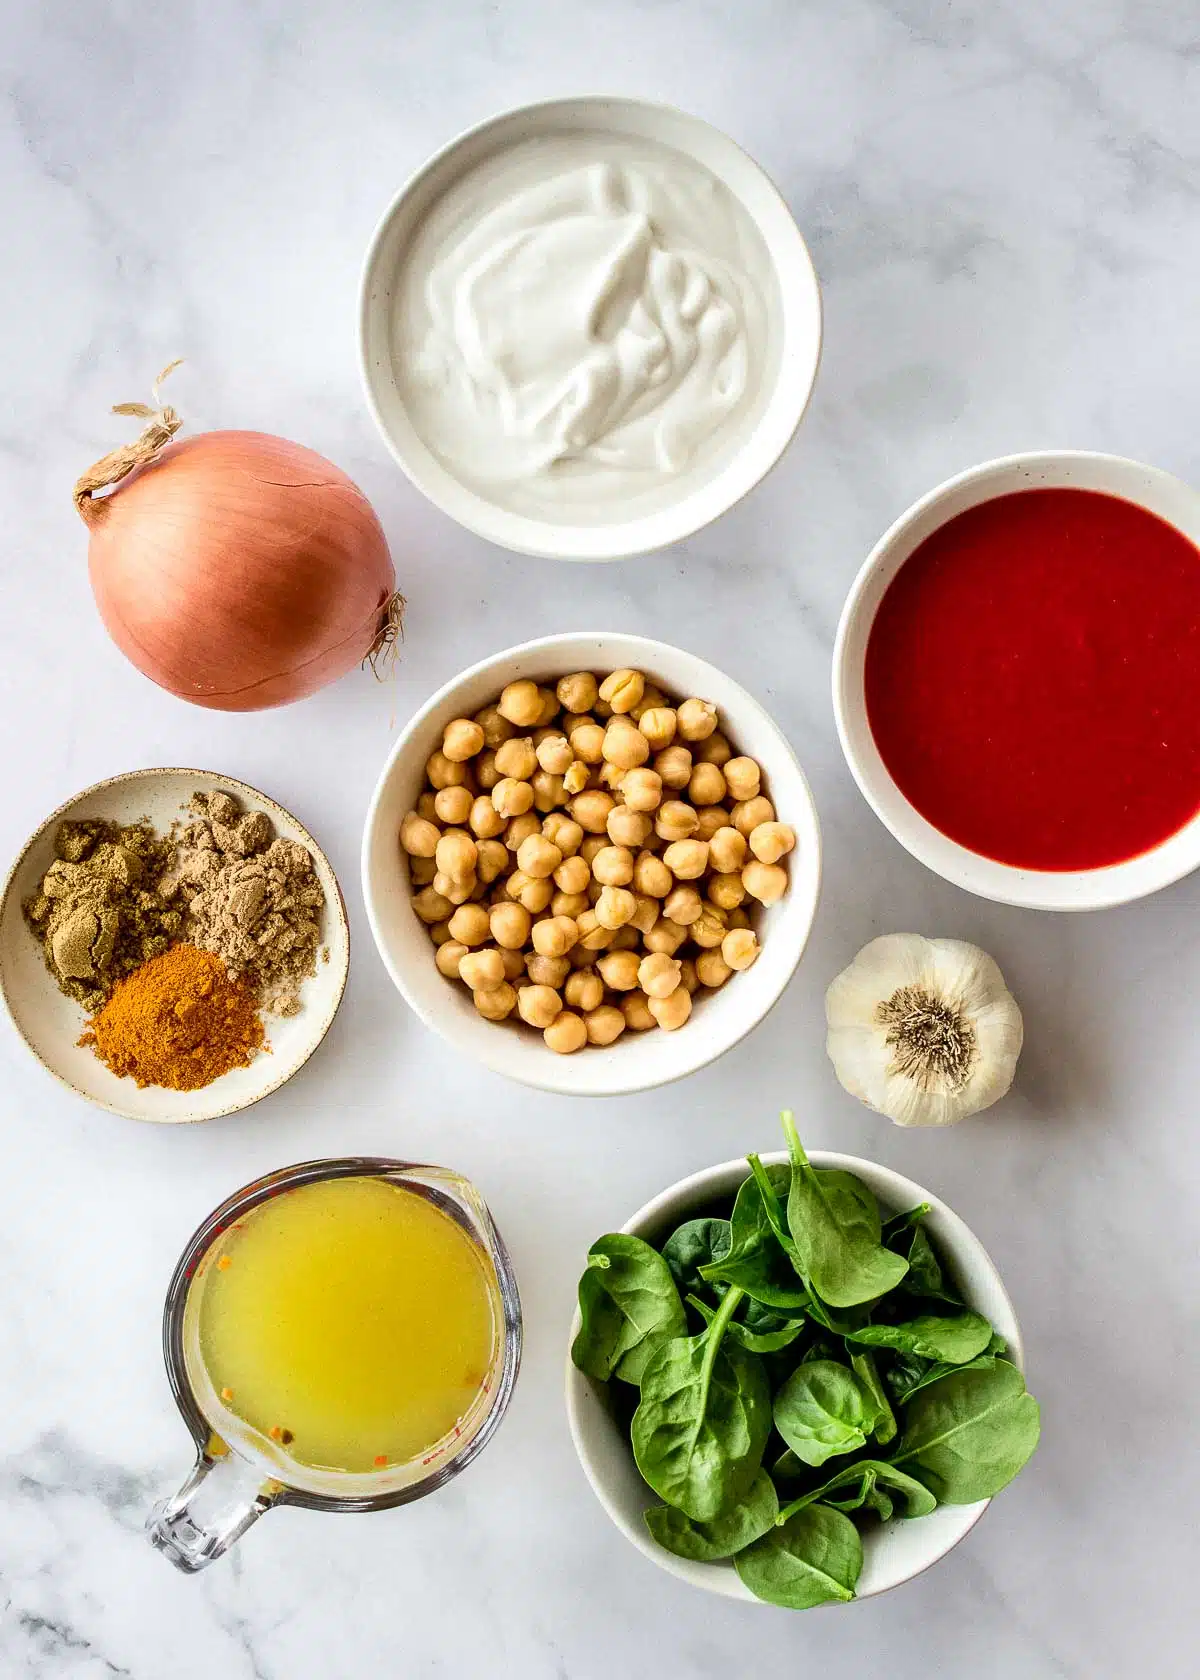 Ingredients in bowls: chickpeas, crushed tomatoes, spices, spinach and coconut milk.